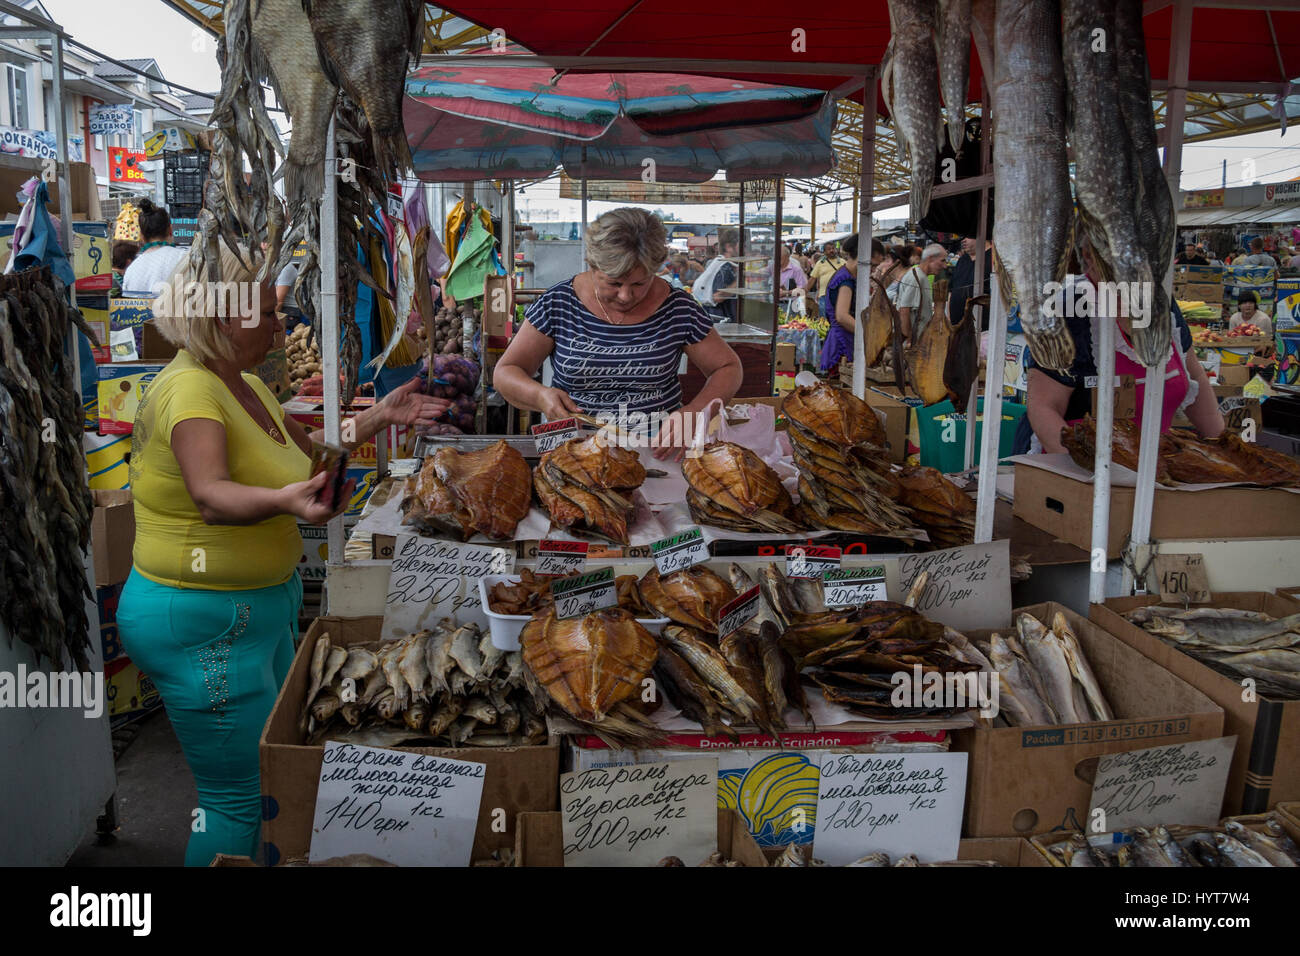 ODESSA, UKRAINE - AUGUST 13, 2015: Fish sellers in Privoz Market, Odessa, Ukraine  picture of old women selling smoked fish on the iconic Privoz marke Stock Photo